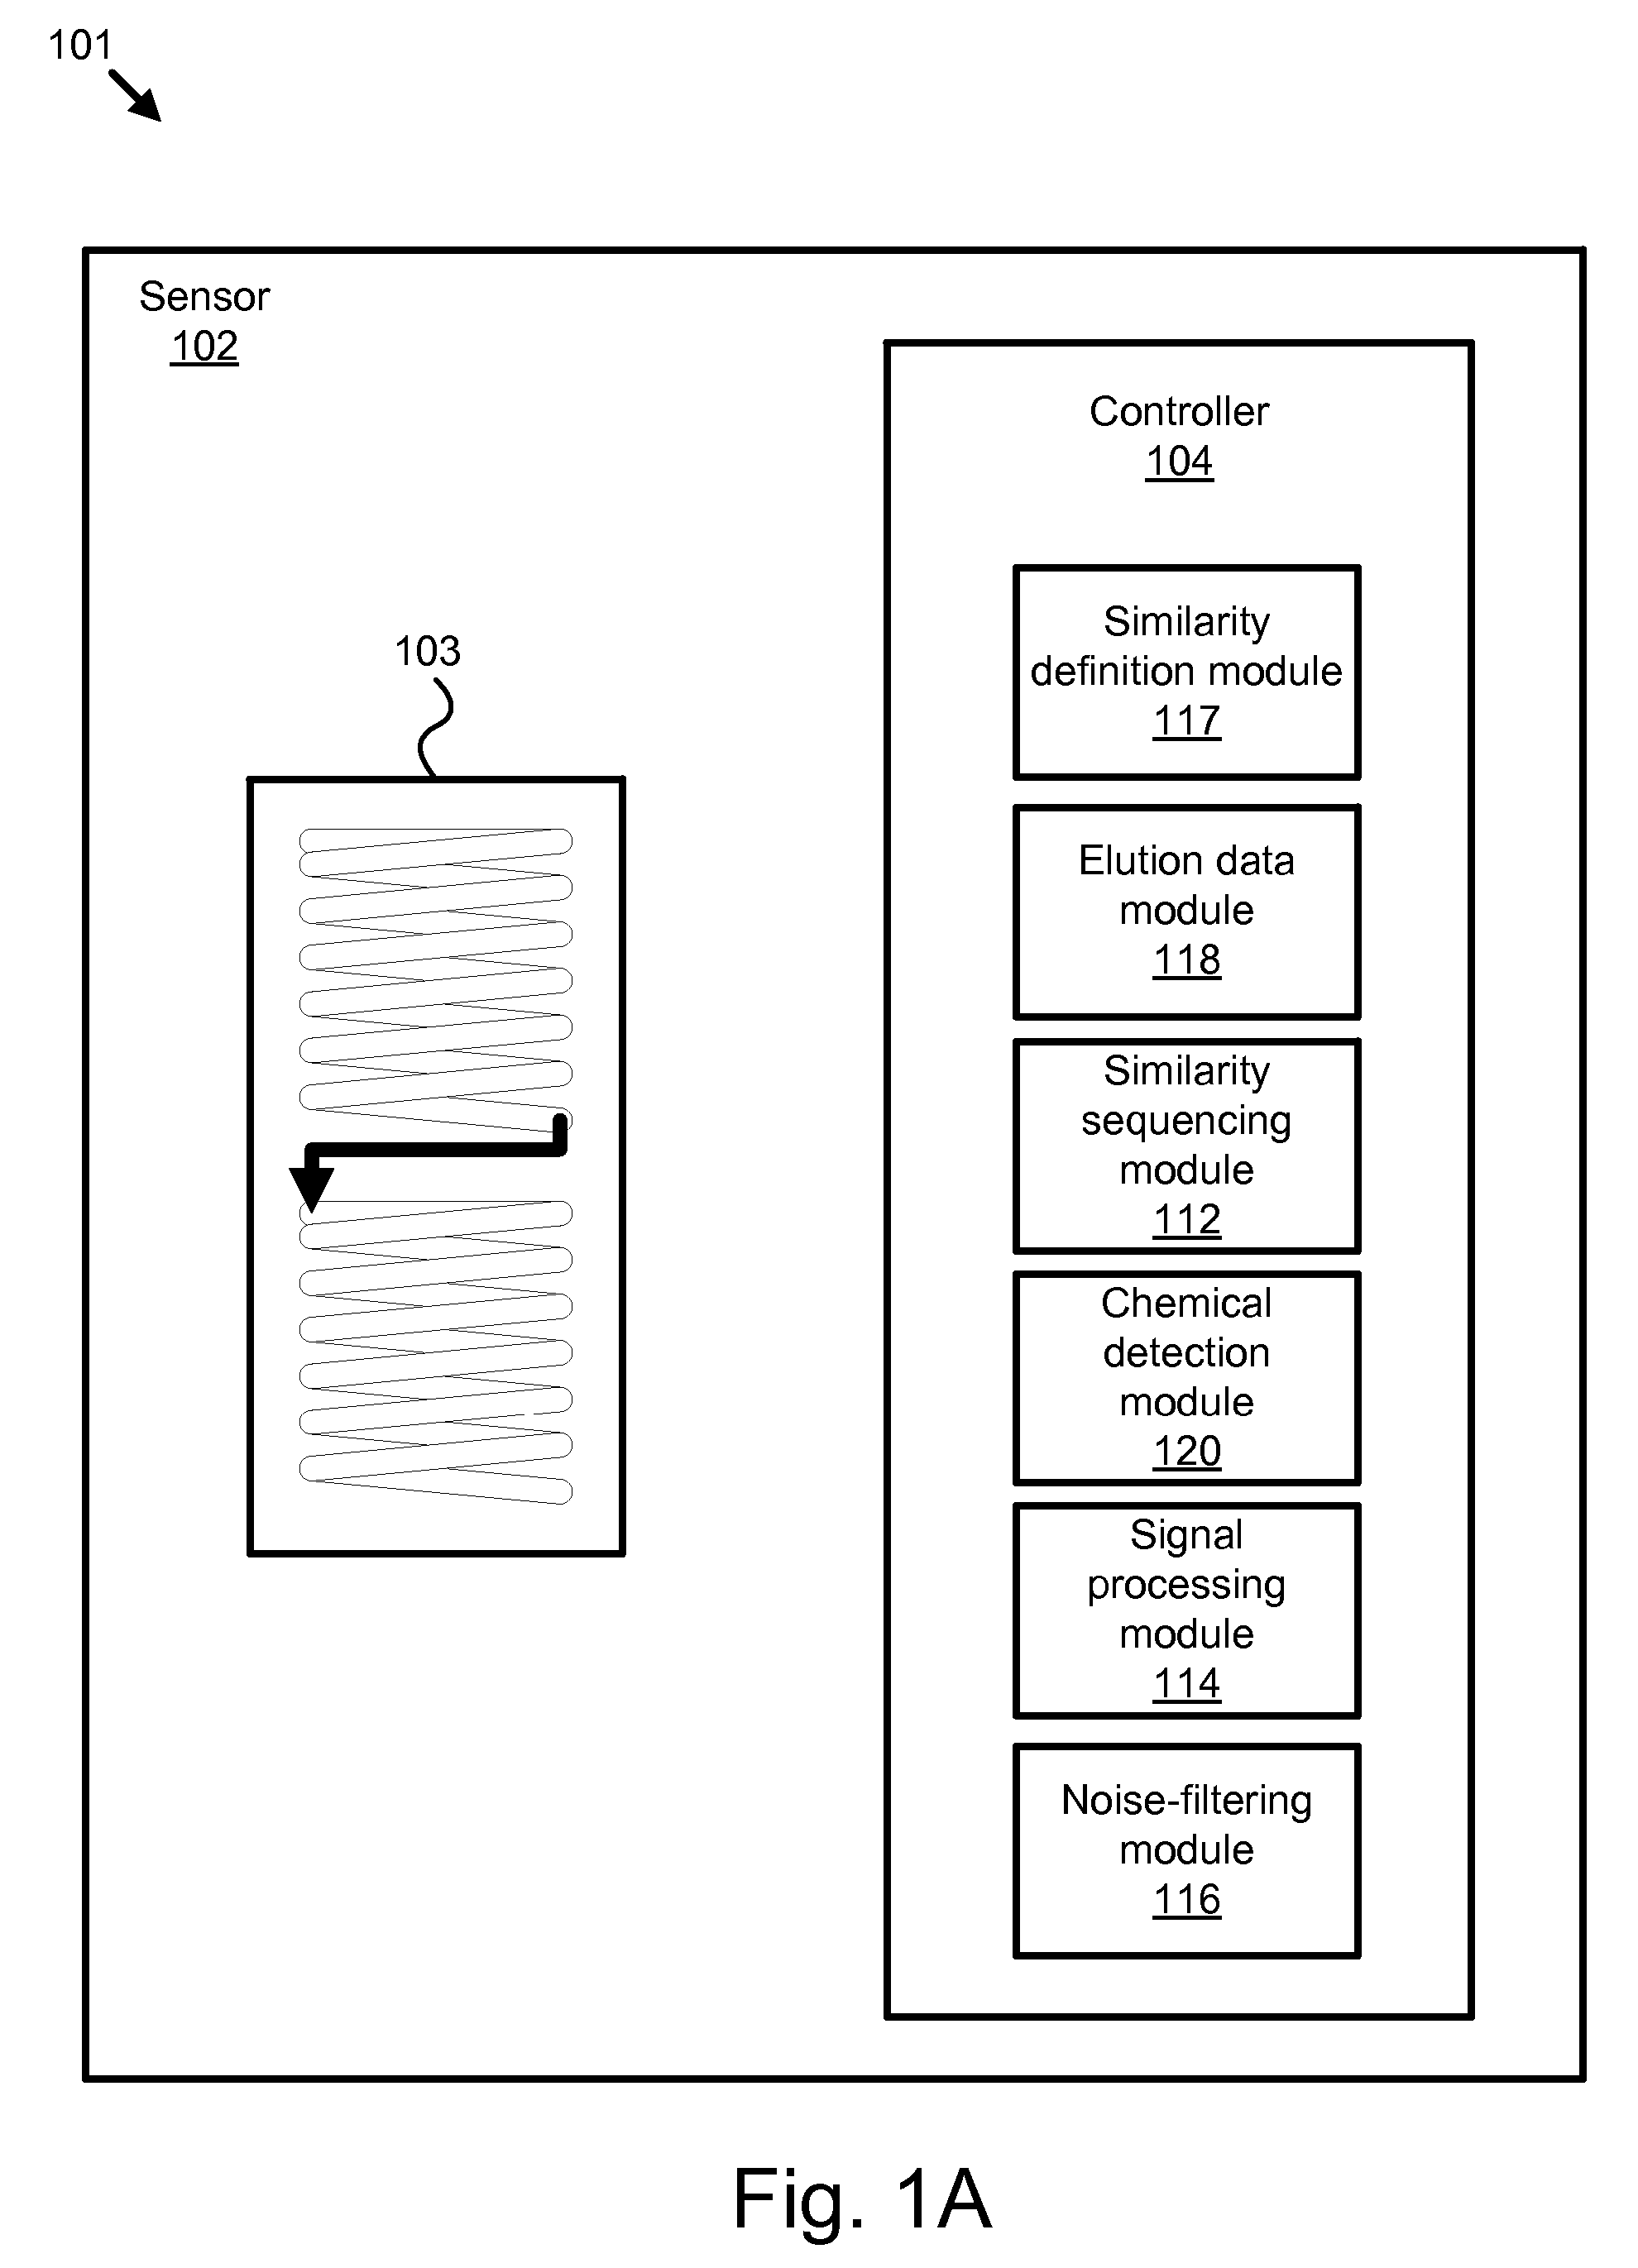 Apparatus, system, and method for broad spectrum chemical detection